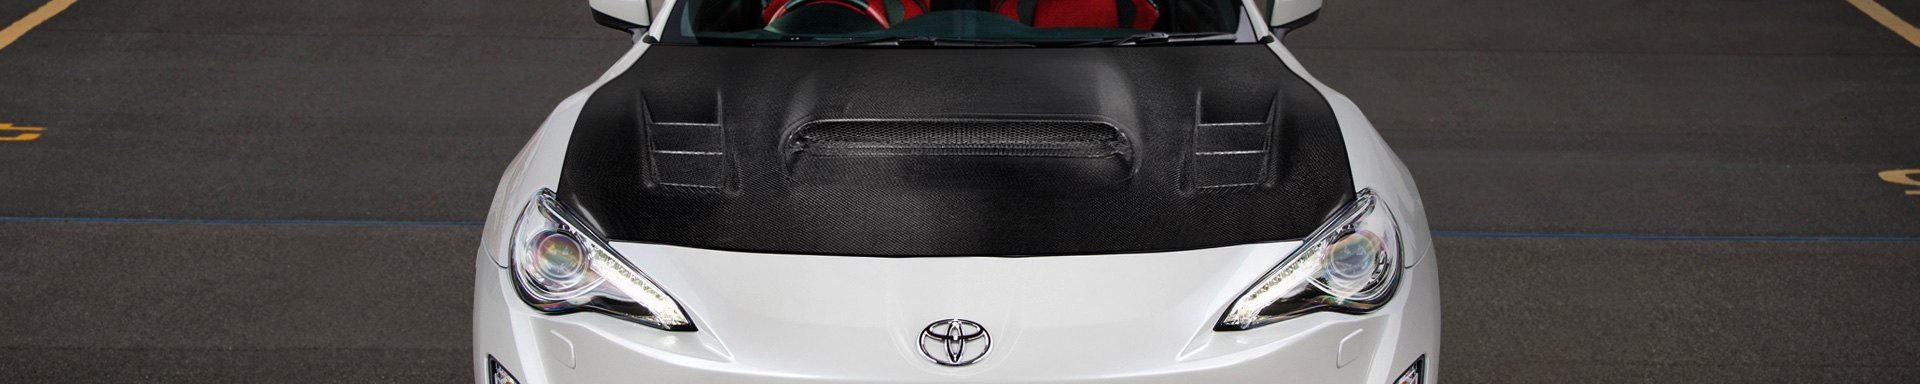 New Racing-Inspired STI Style Hood for BRZ, FR-S & GT86 By Carbon Creations